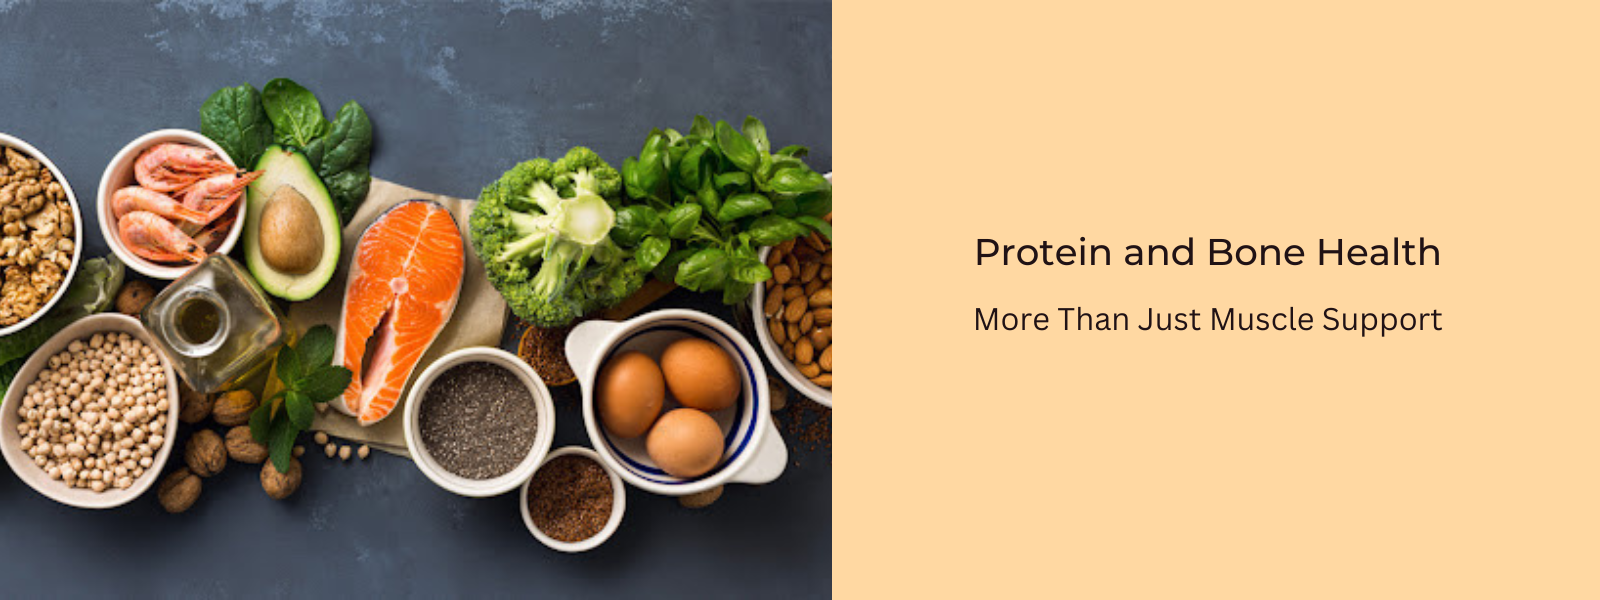 Protein and Bone Health: More Than Just Muscle Support